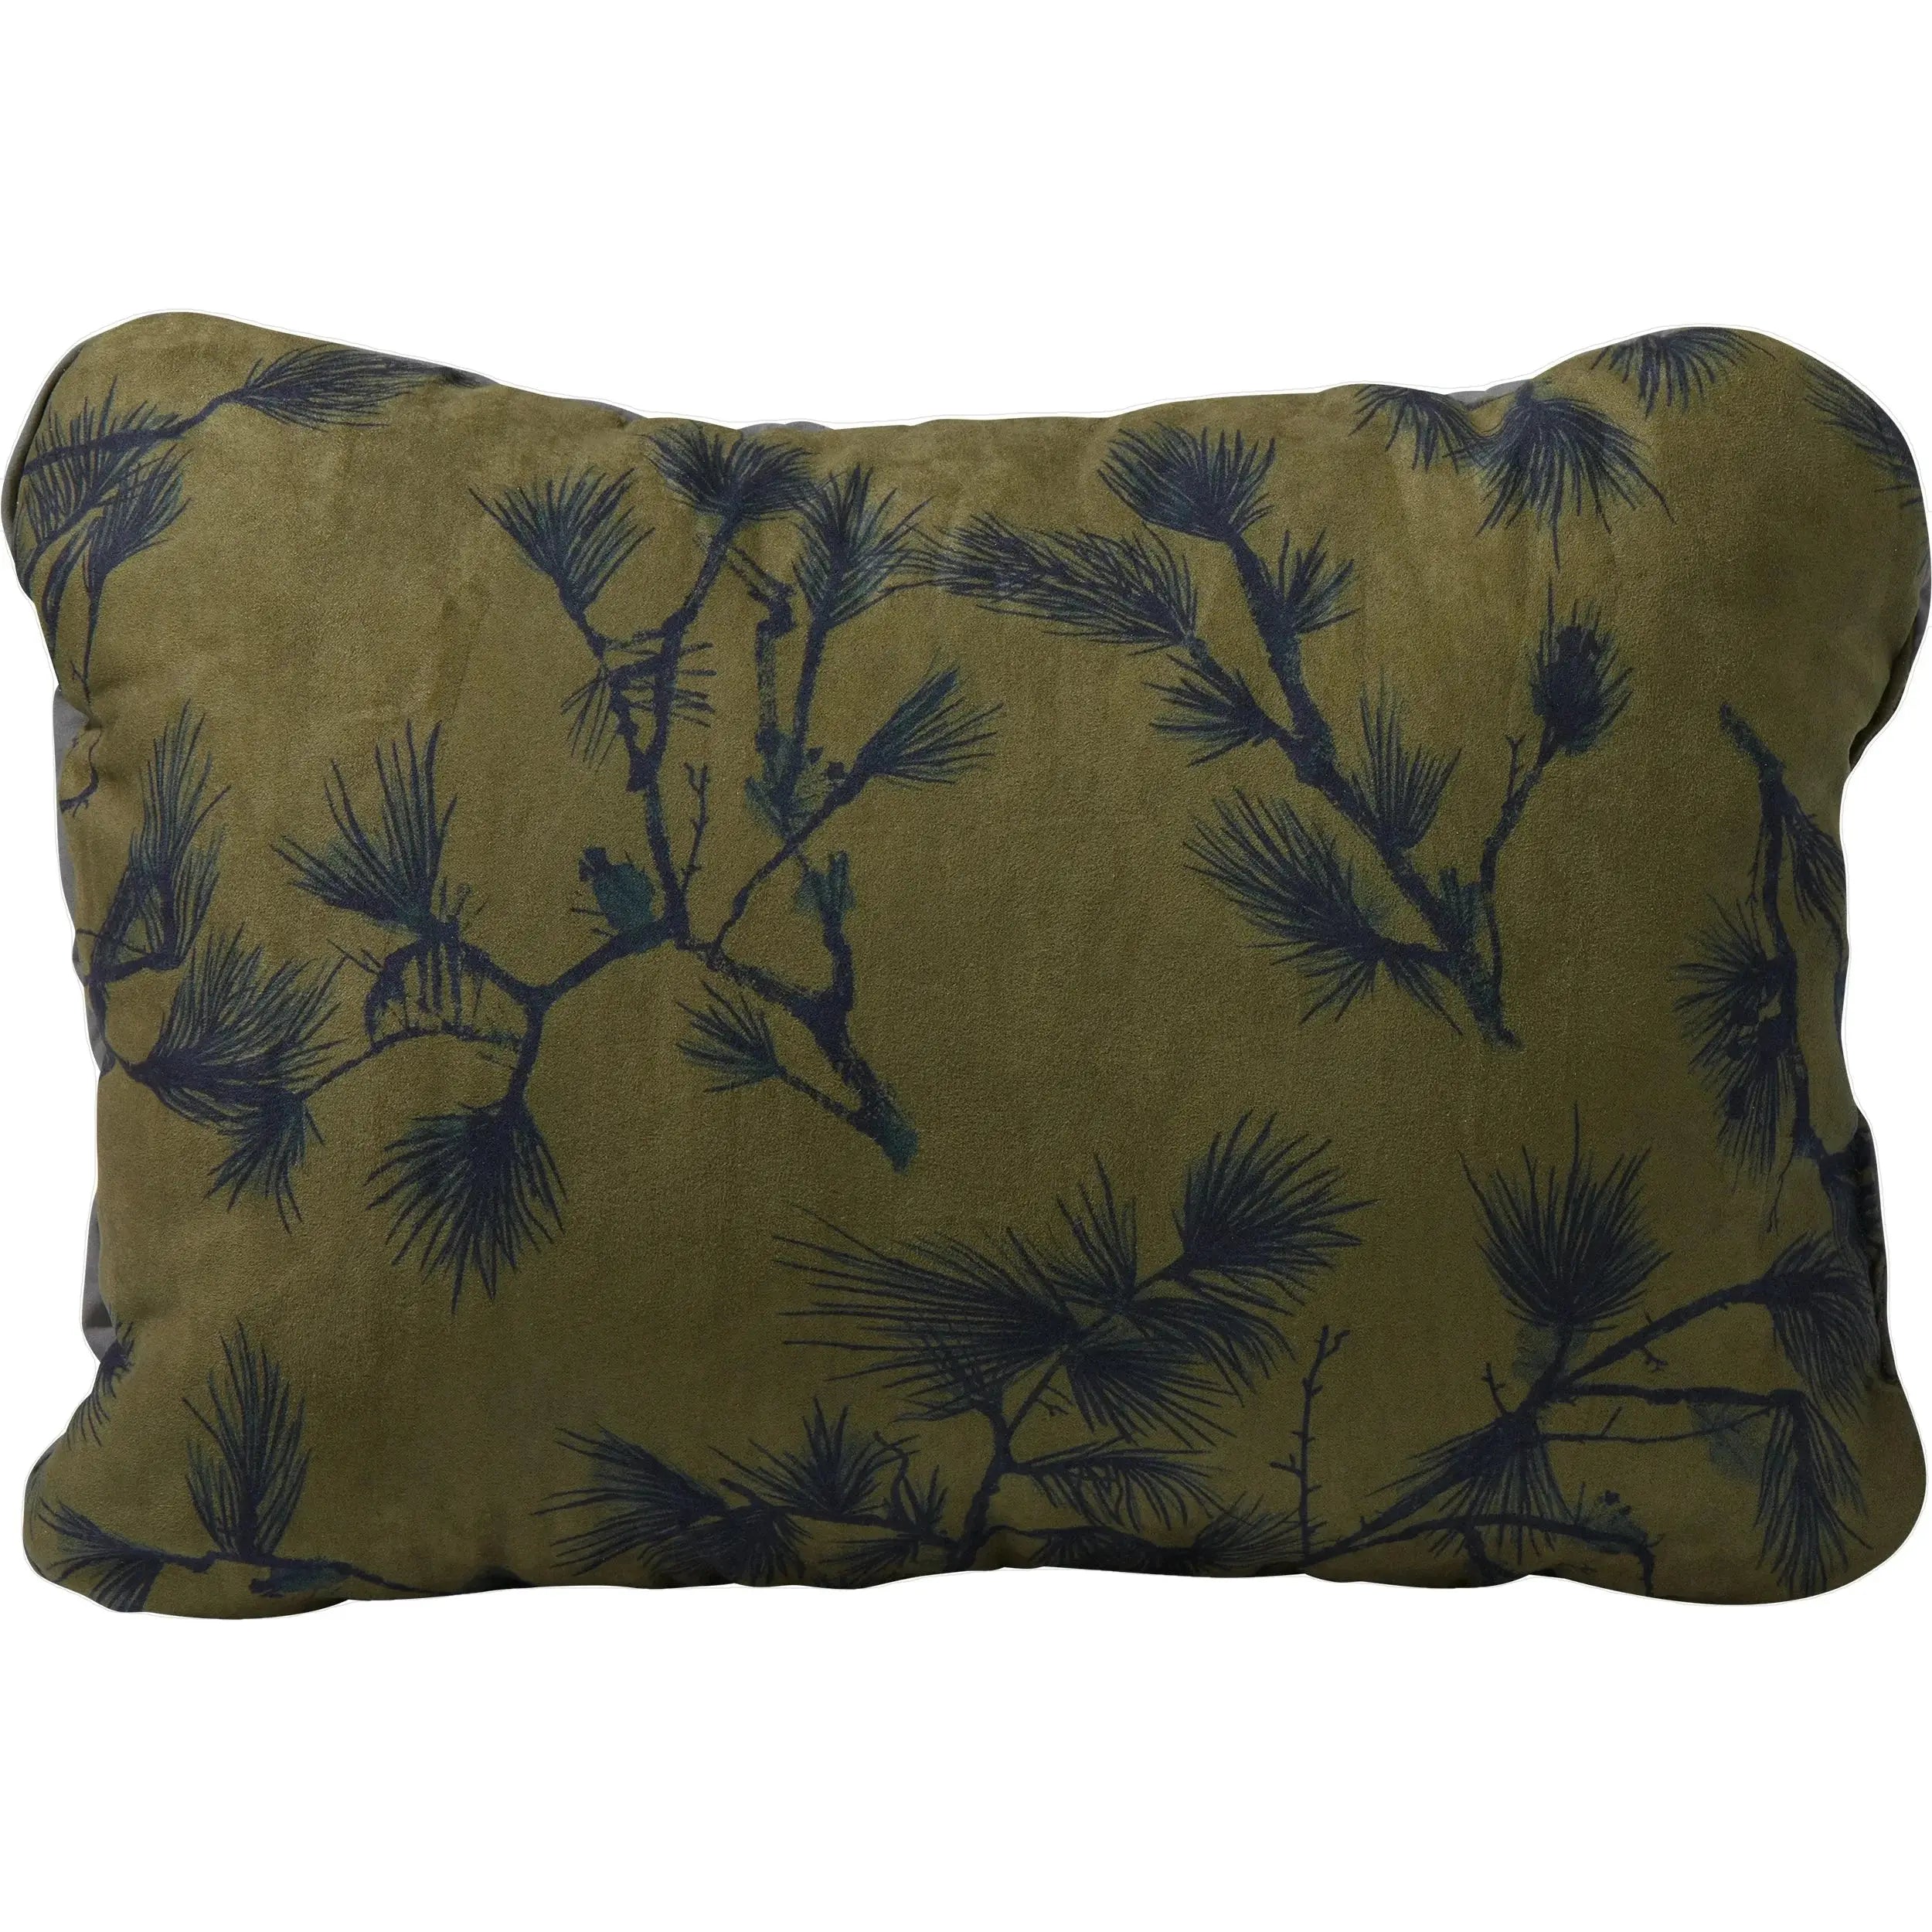 Thermarest Compressible Pillow Cinch - Large, Pines, front view 